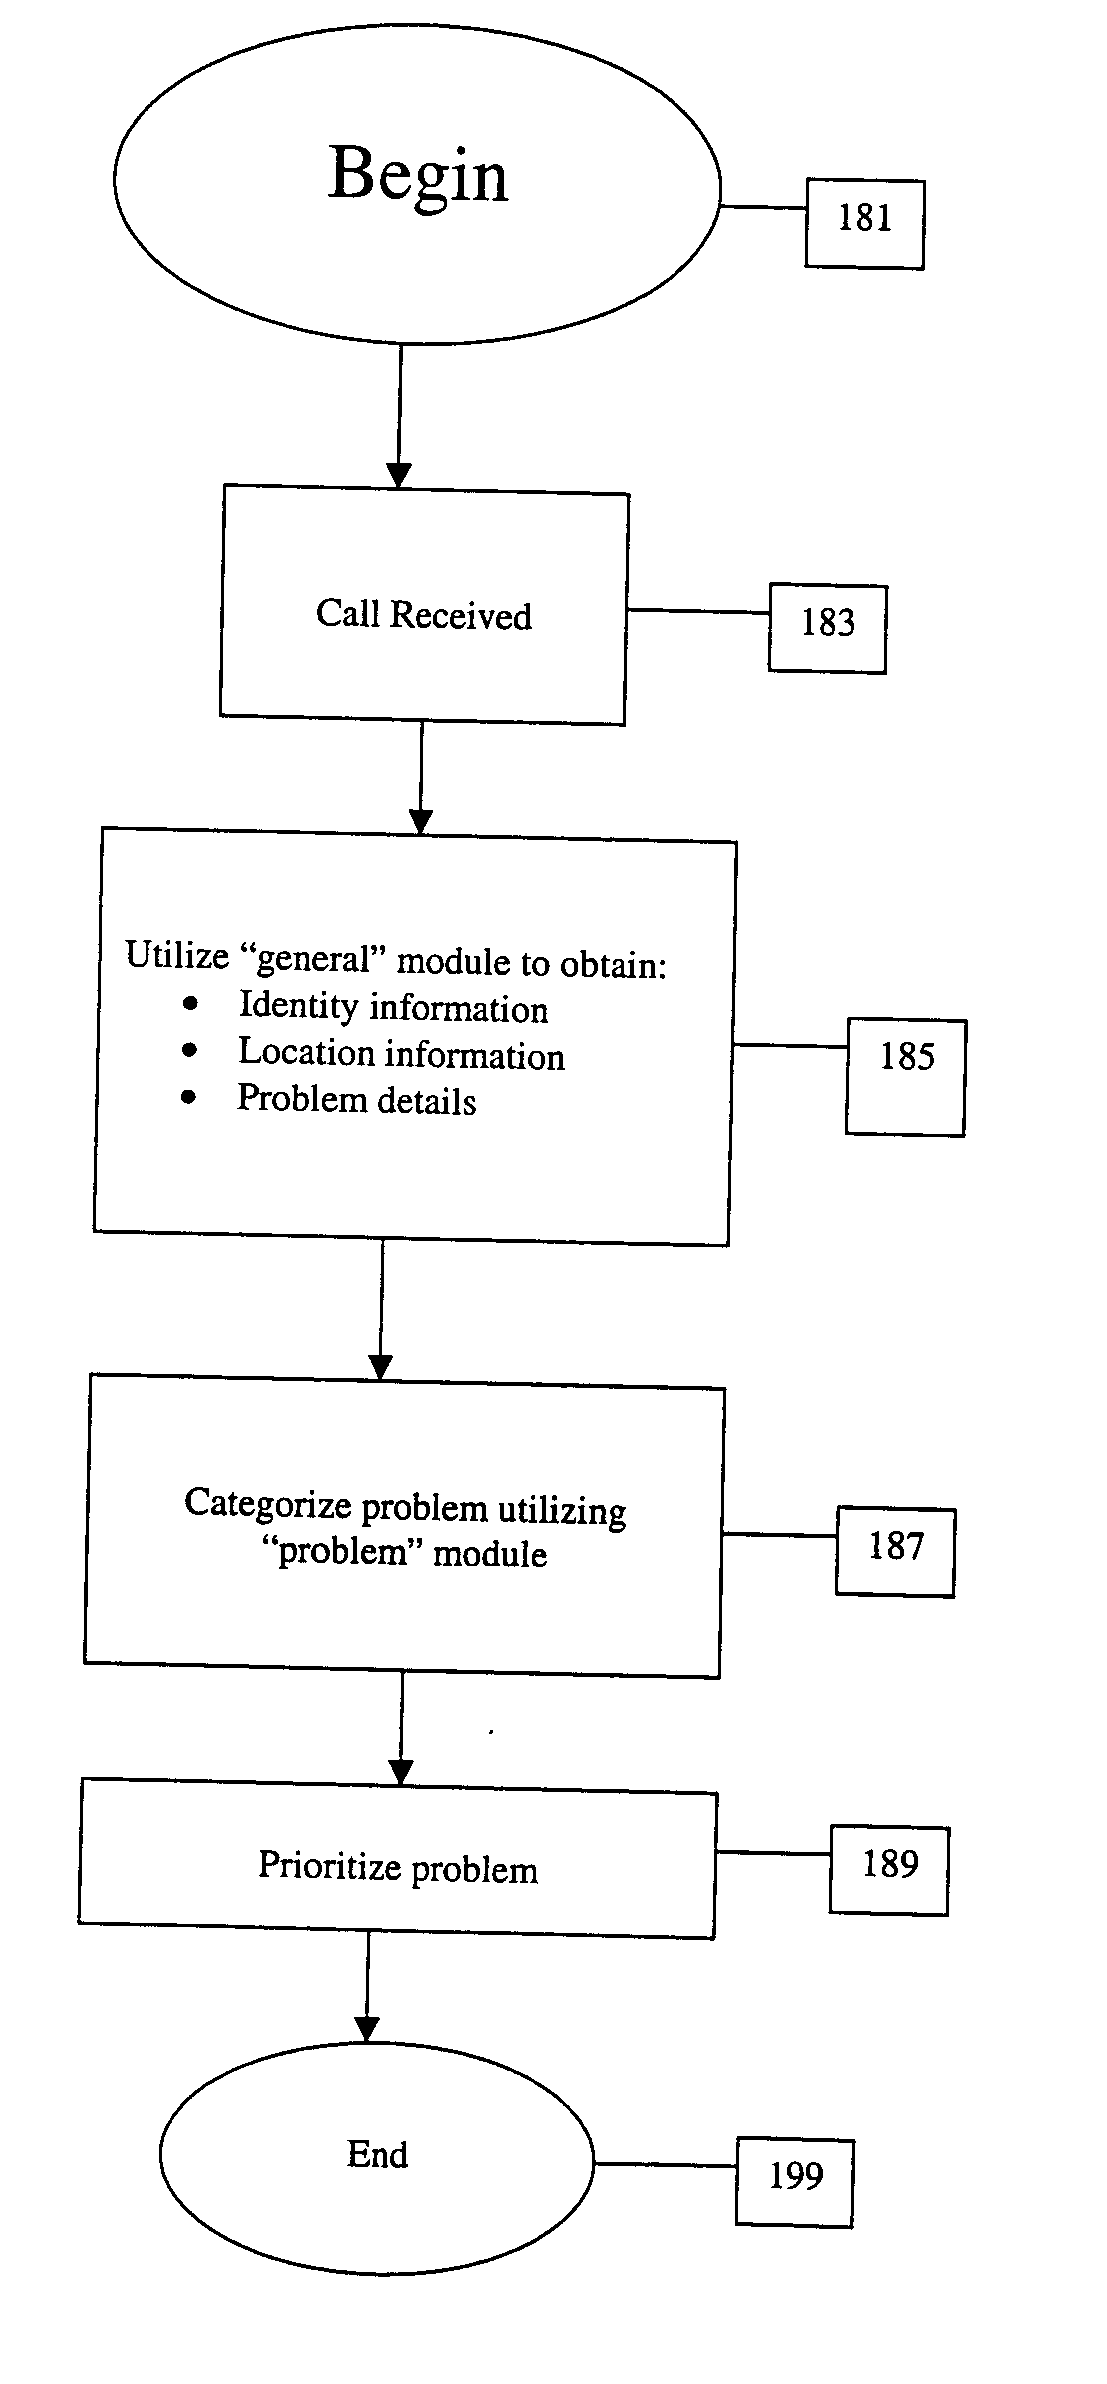 Method and apparatus for the management of infrastructure assets, work orders,service requests, and work flows, utilizing an integrated call center, database, GIS system, and wireless handheld device